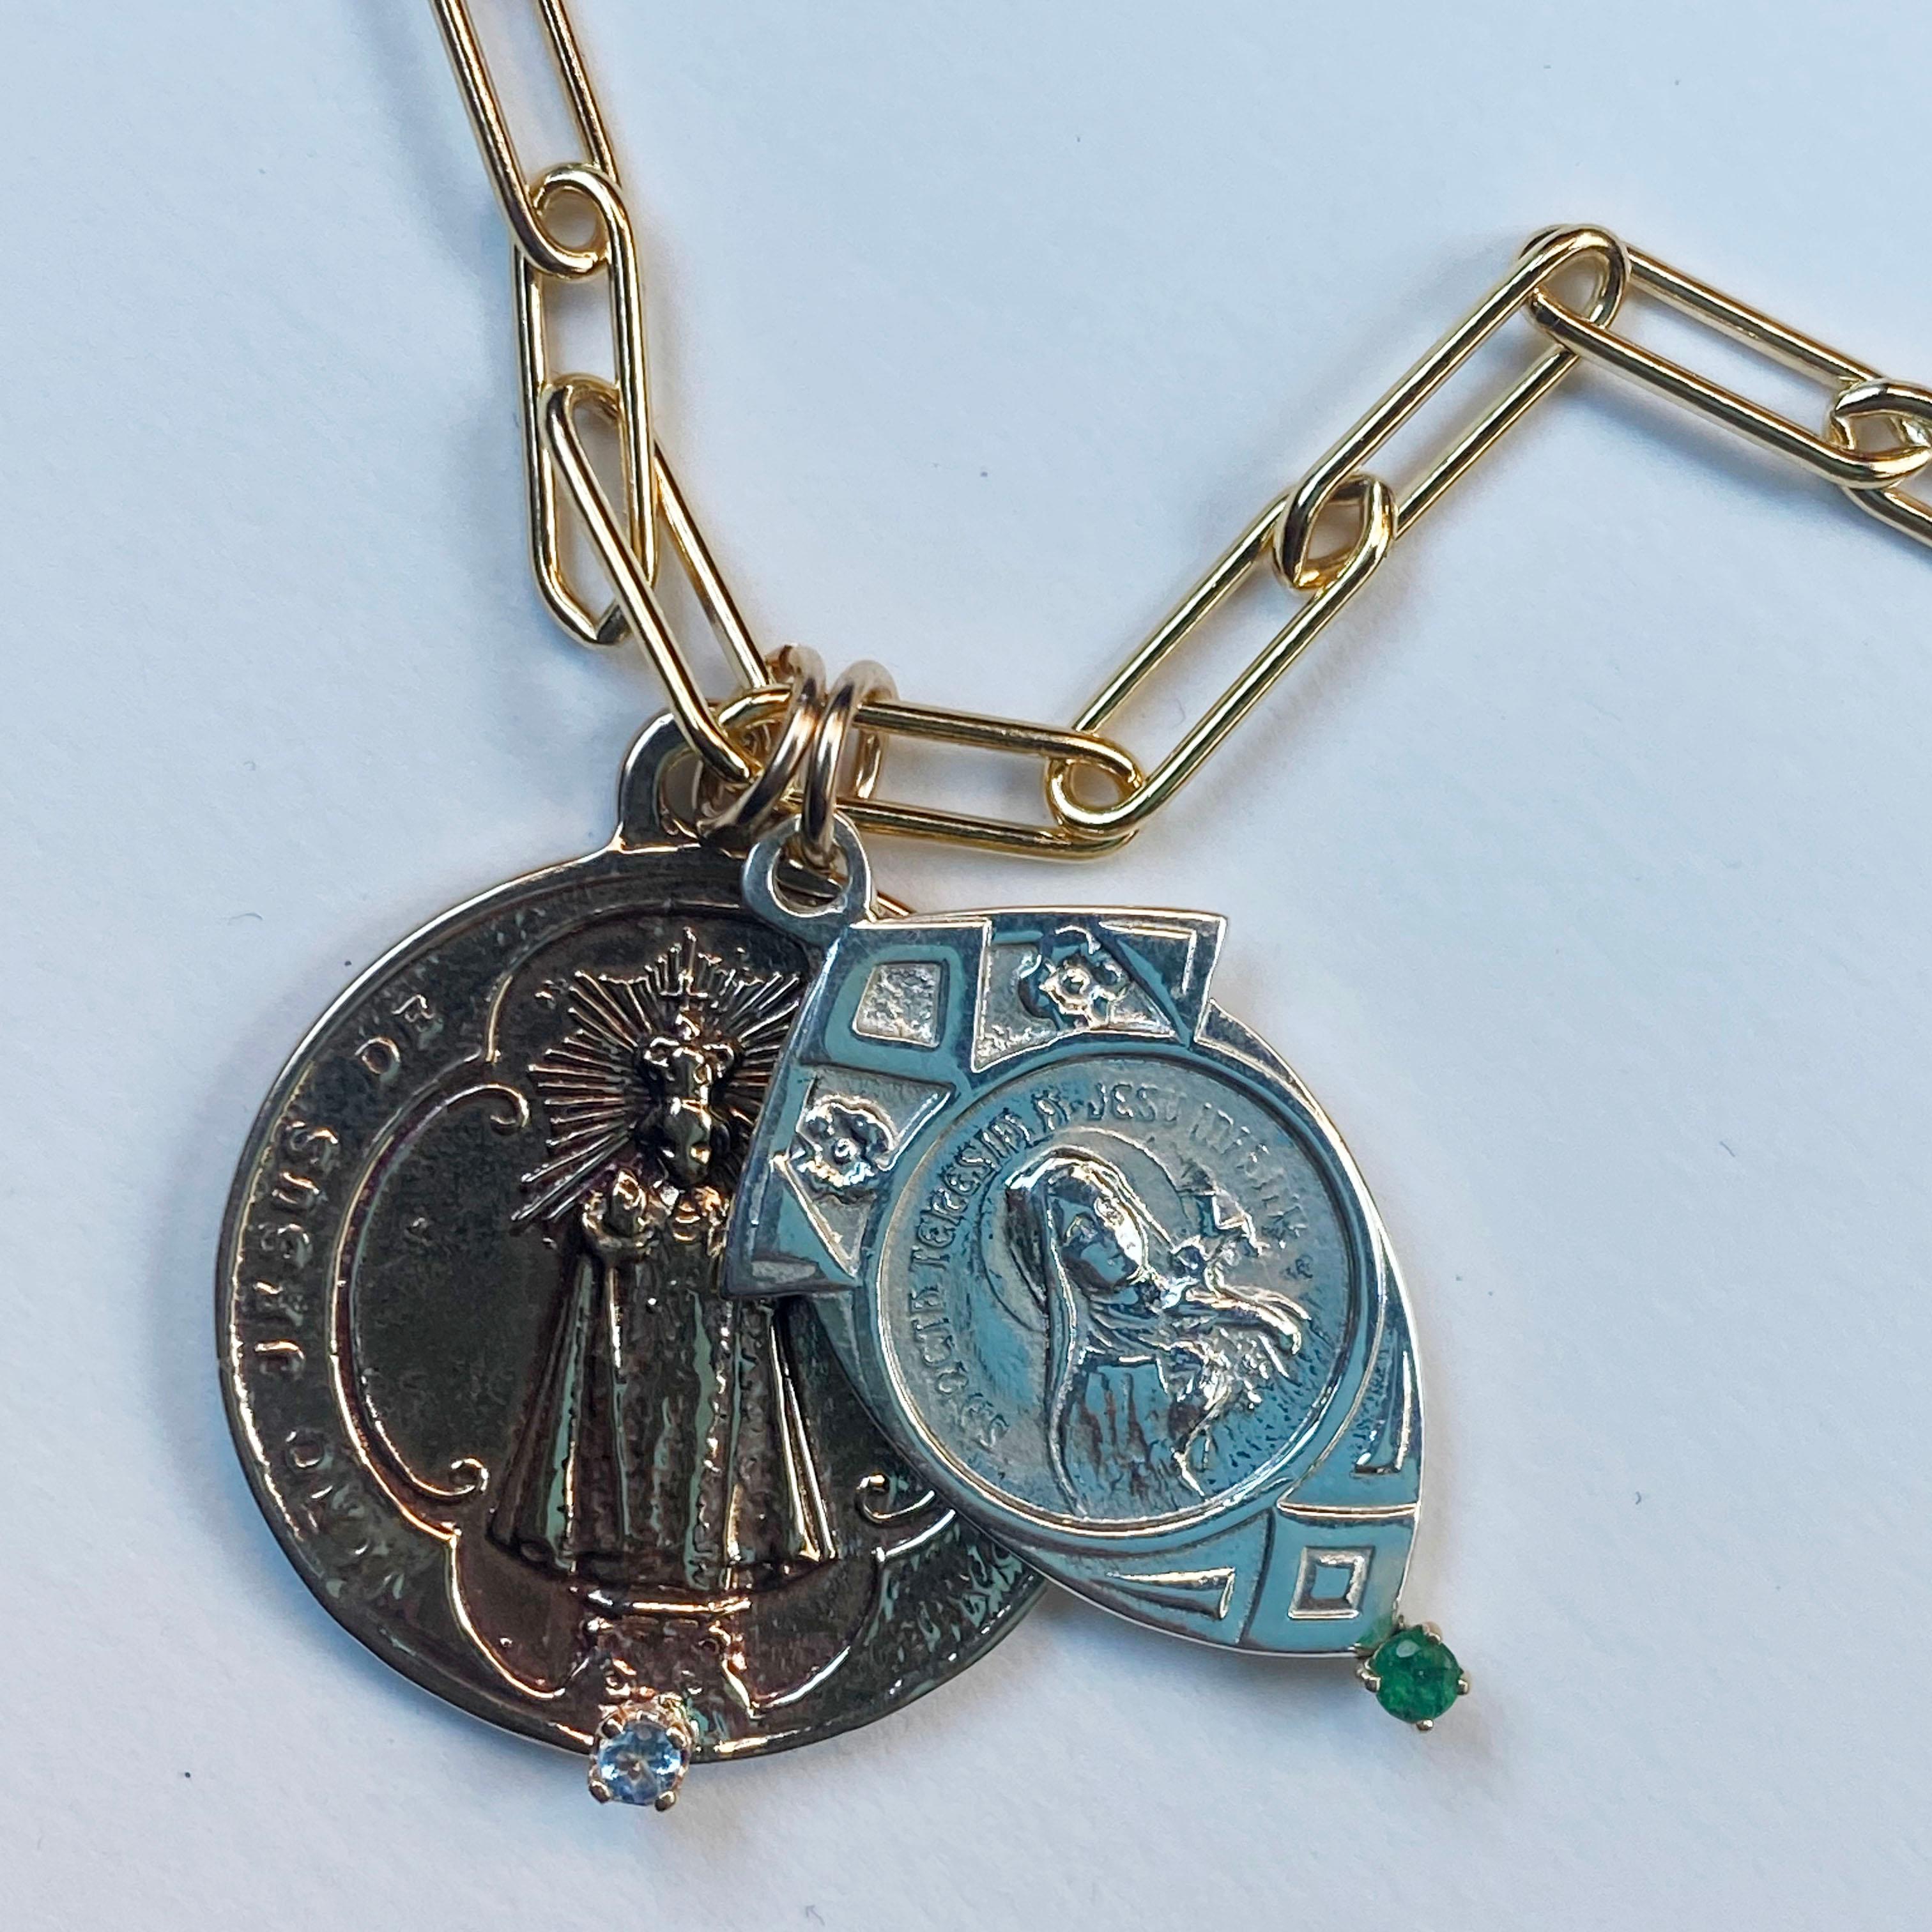 Victorian Medal Virgin Mary Chain Necklace Emerald Aquamarine Silver Bronze J Dauphin For Sale